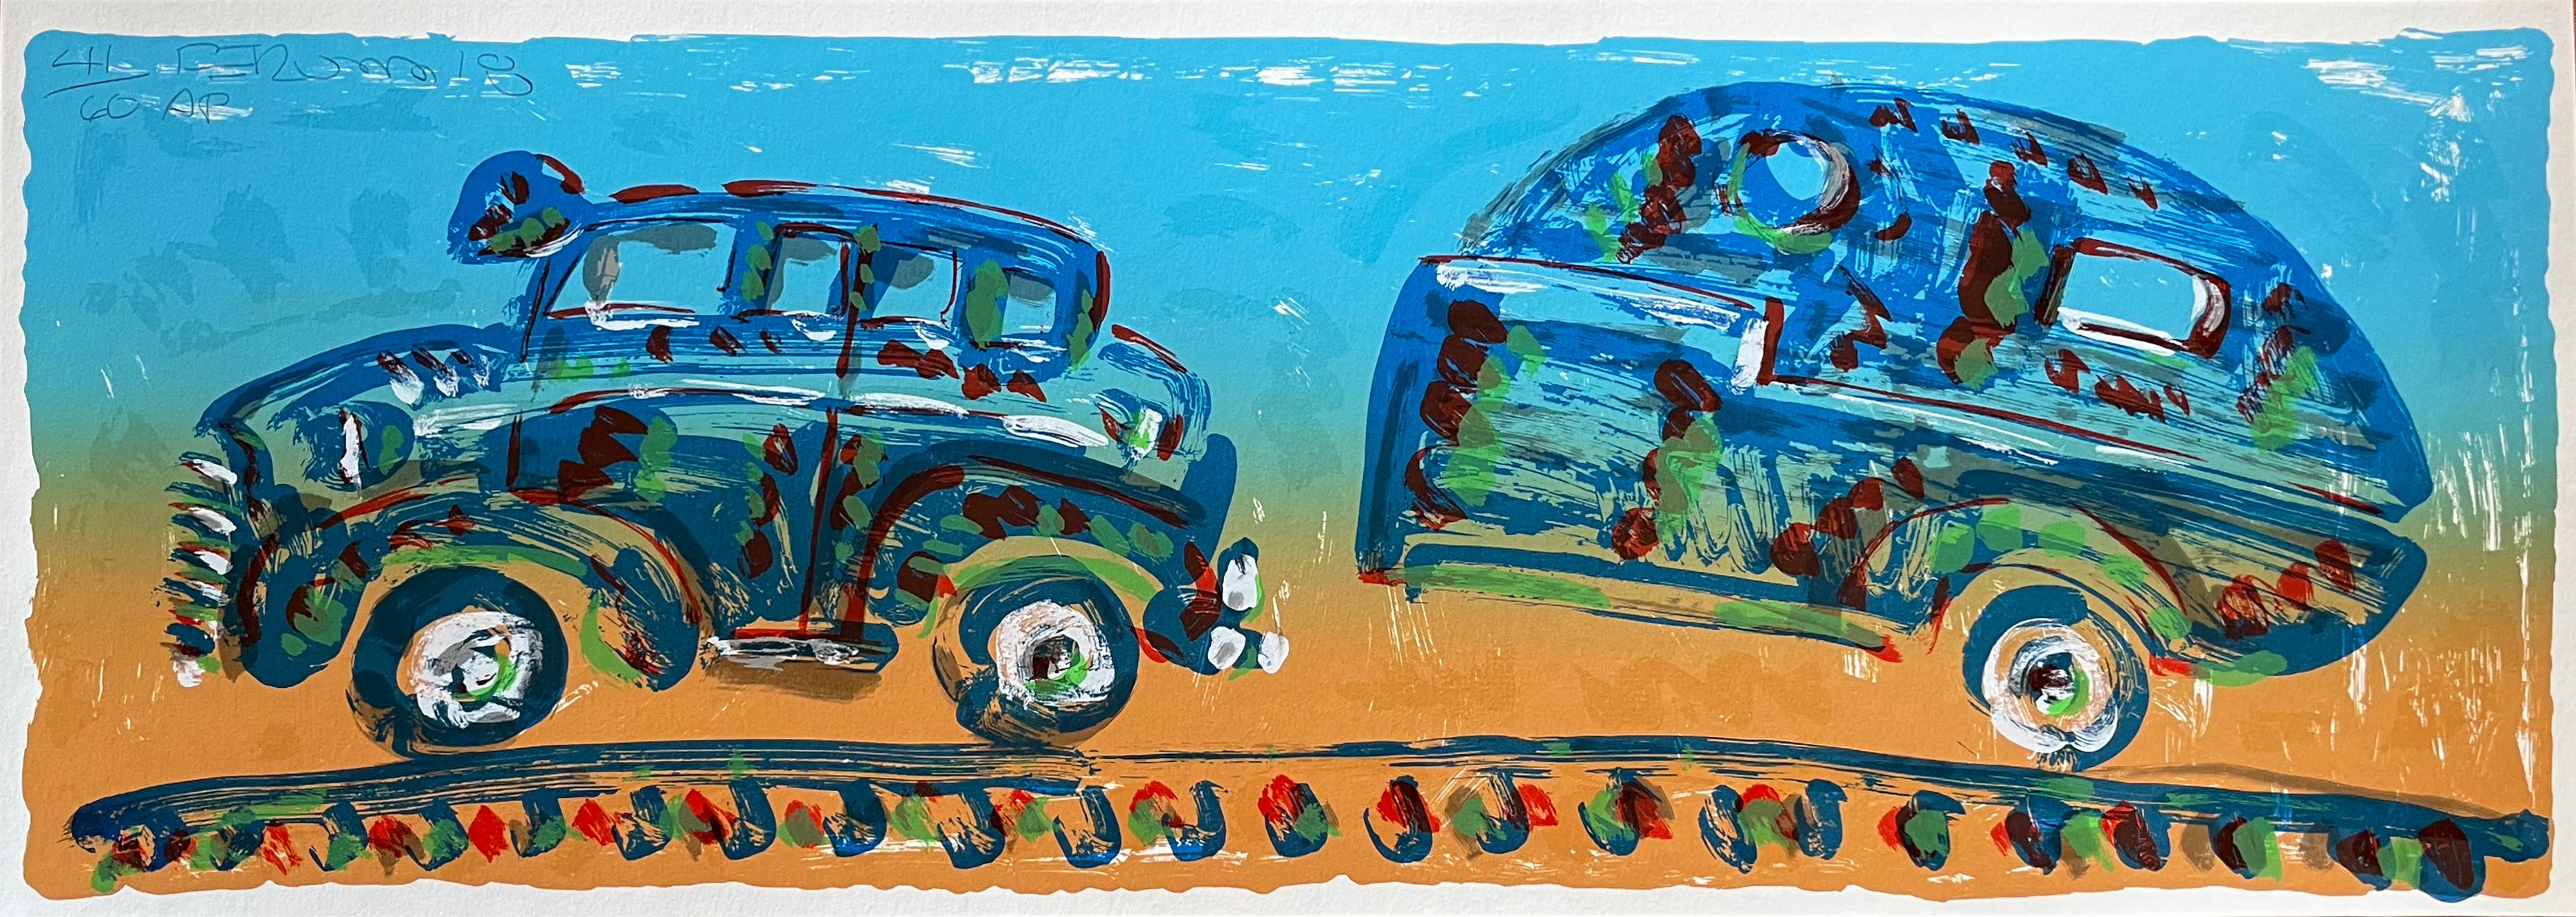 Car and trailer - Print by Frank Romero